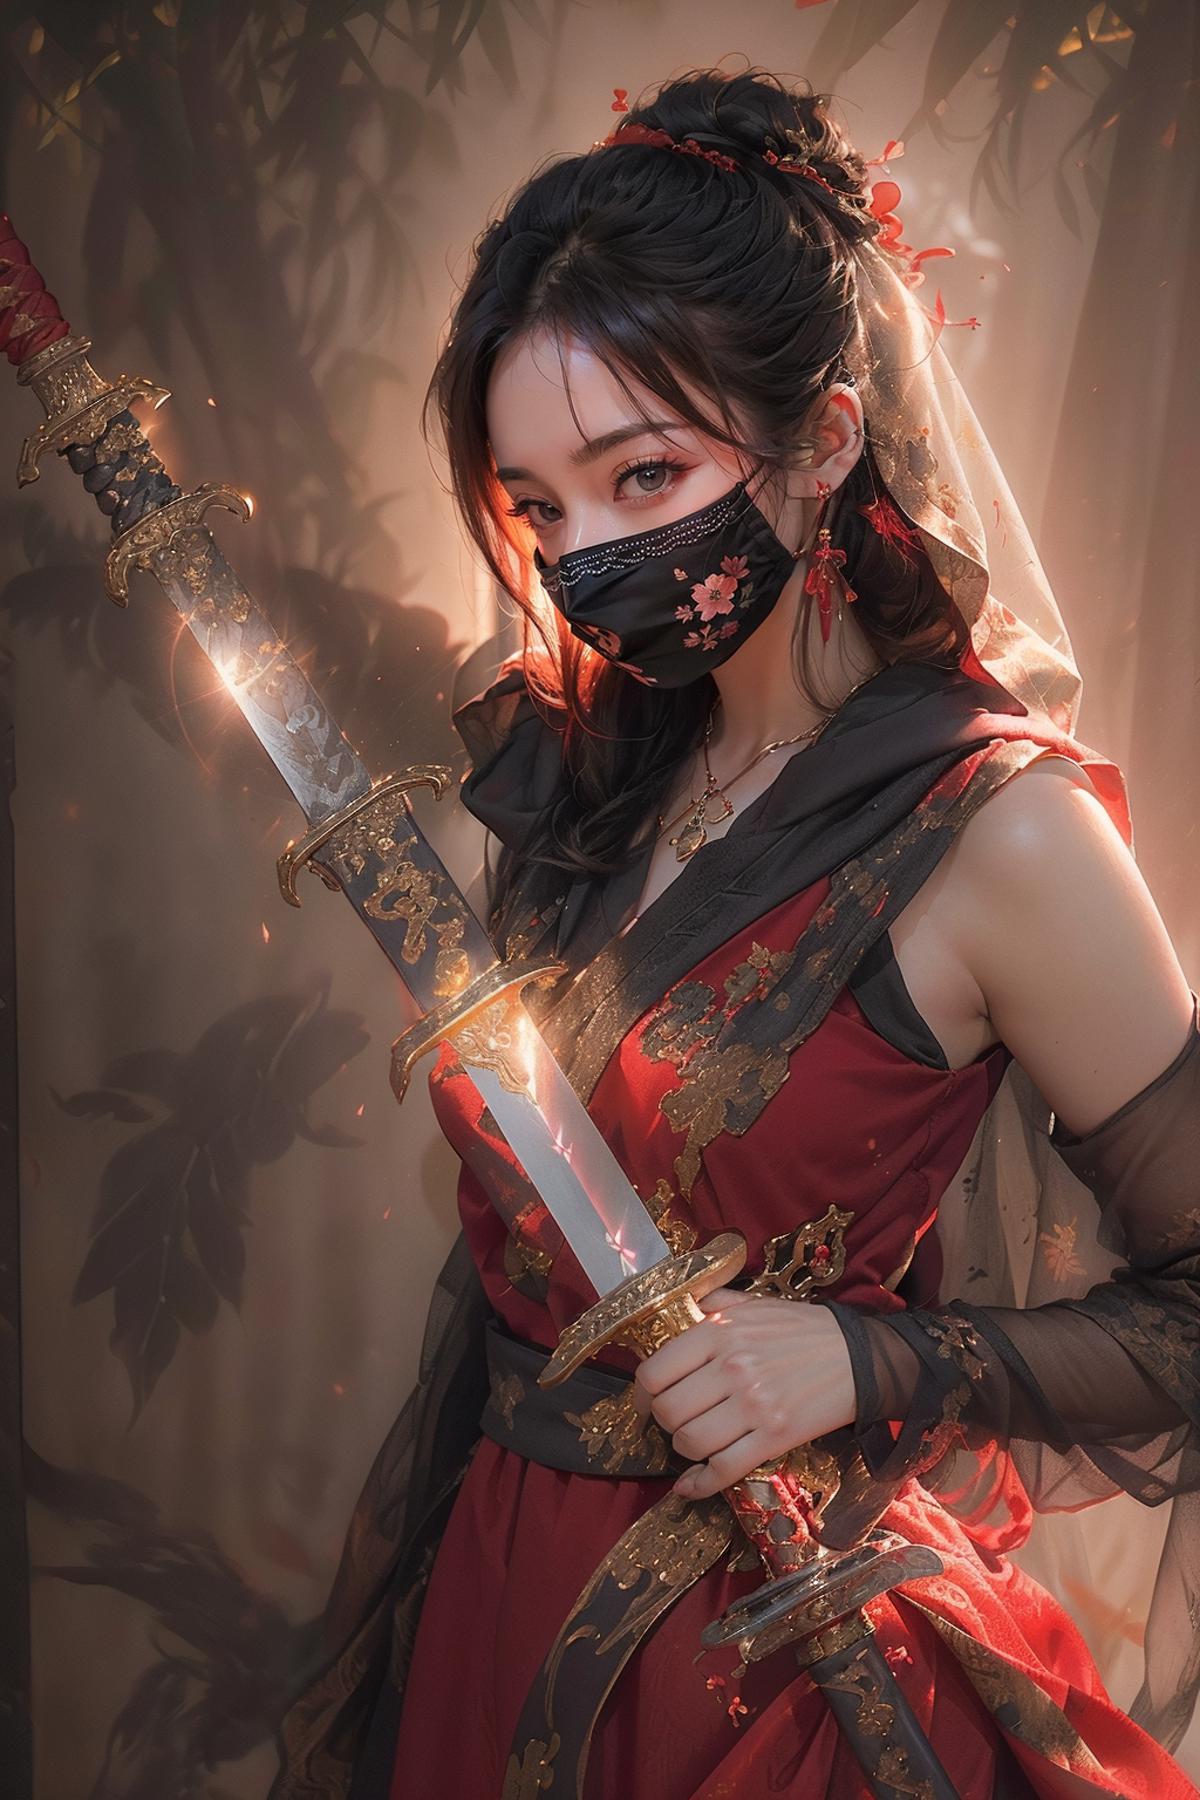 anxiang | 暗香 image by Redpriest9527